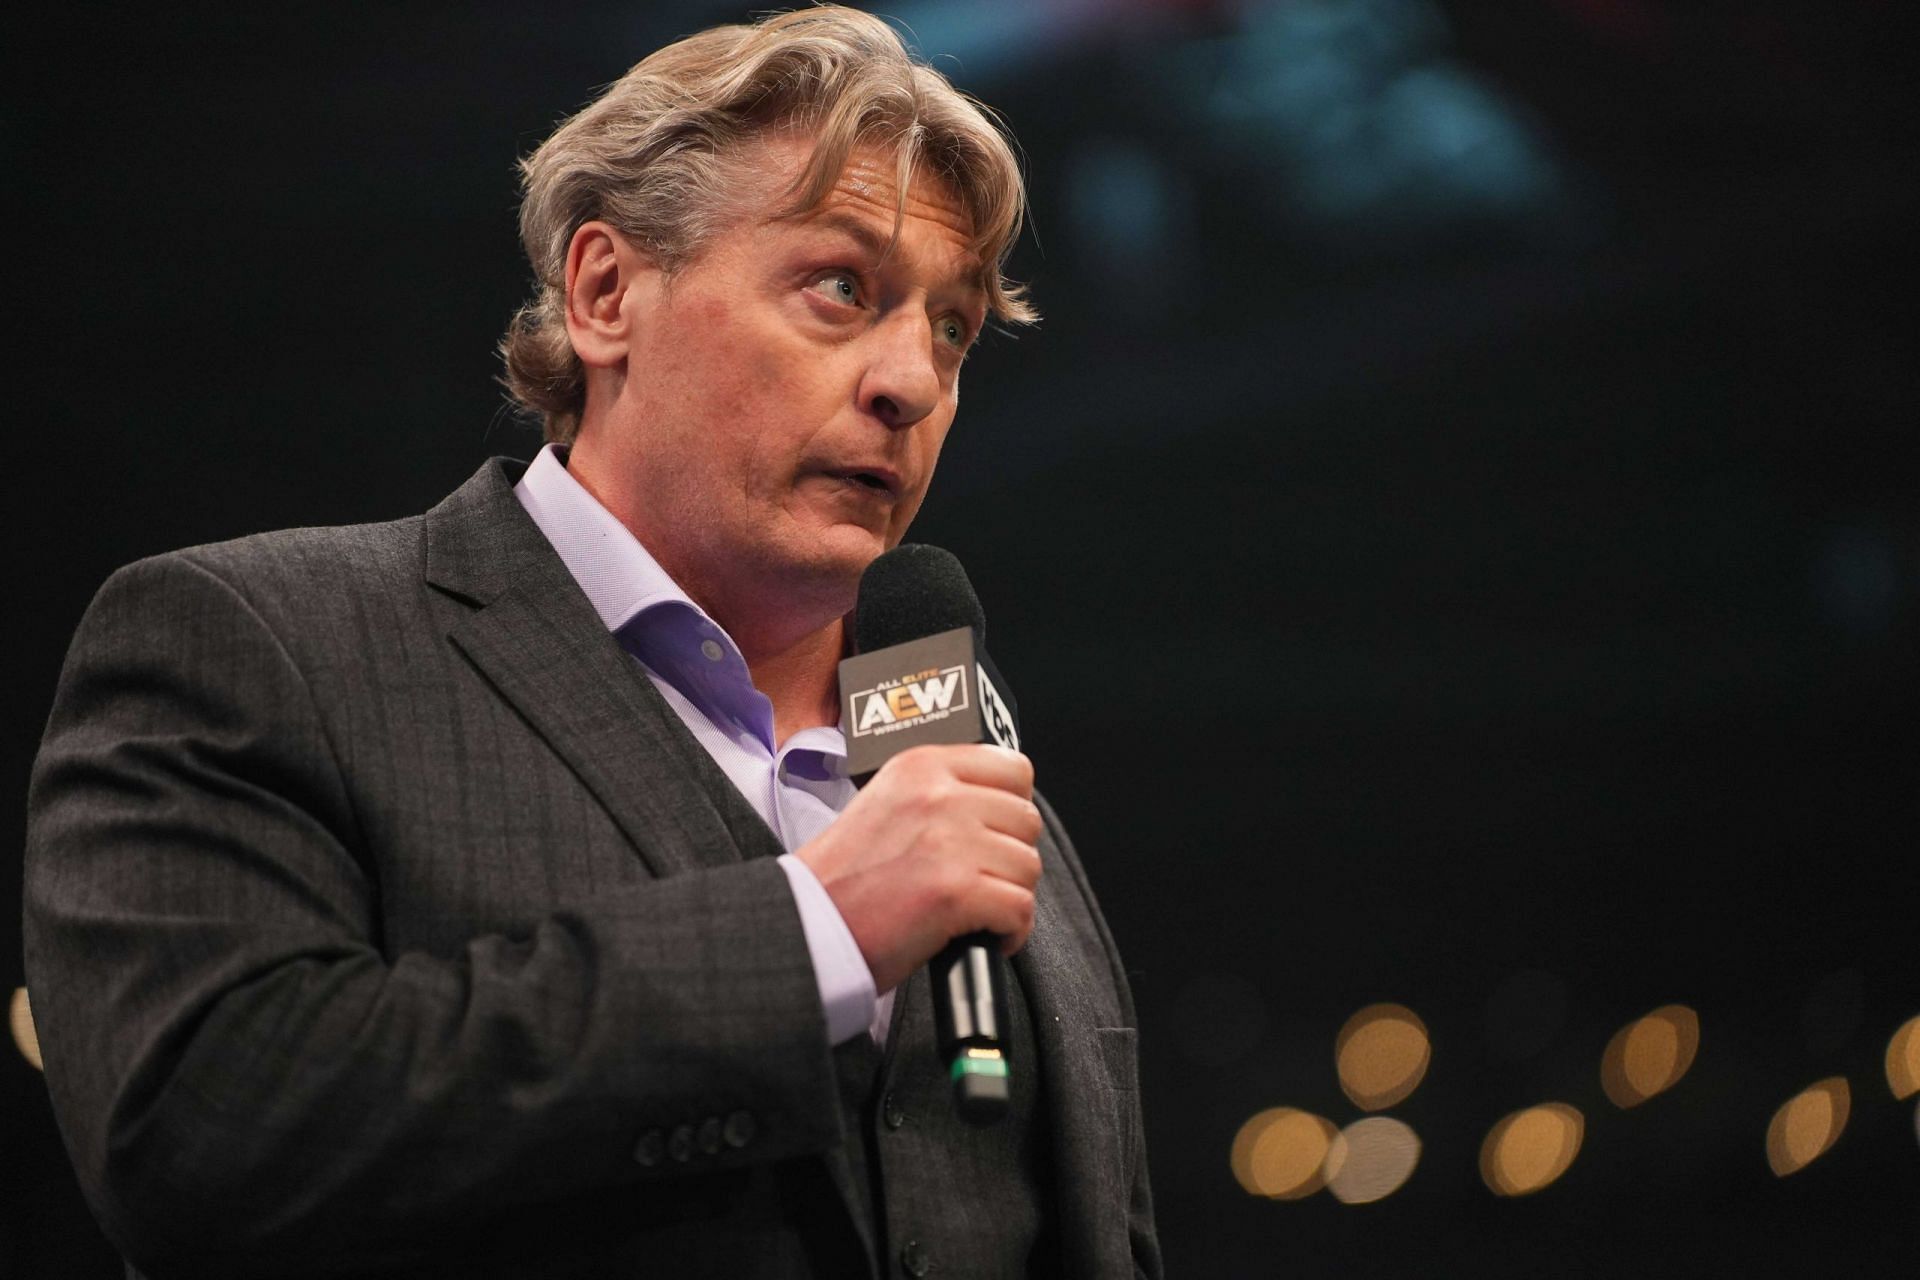 William Regal is a former RAW General Manager.